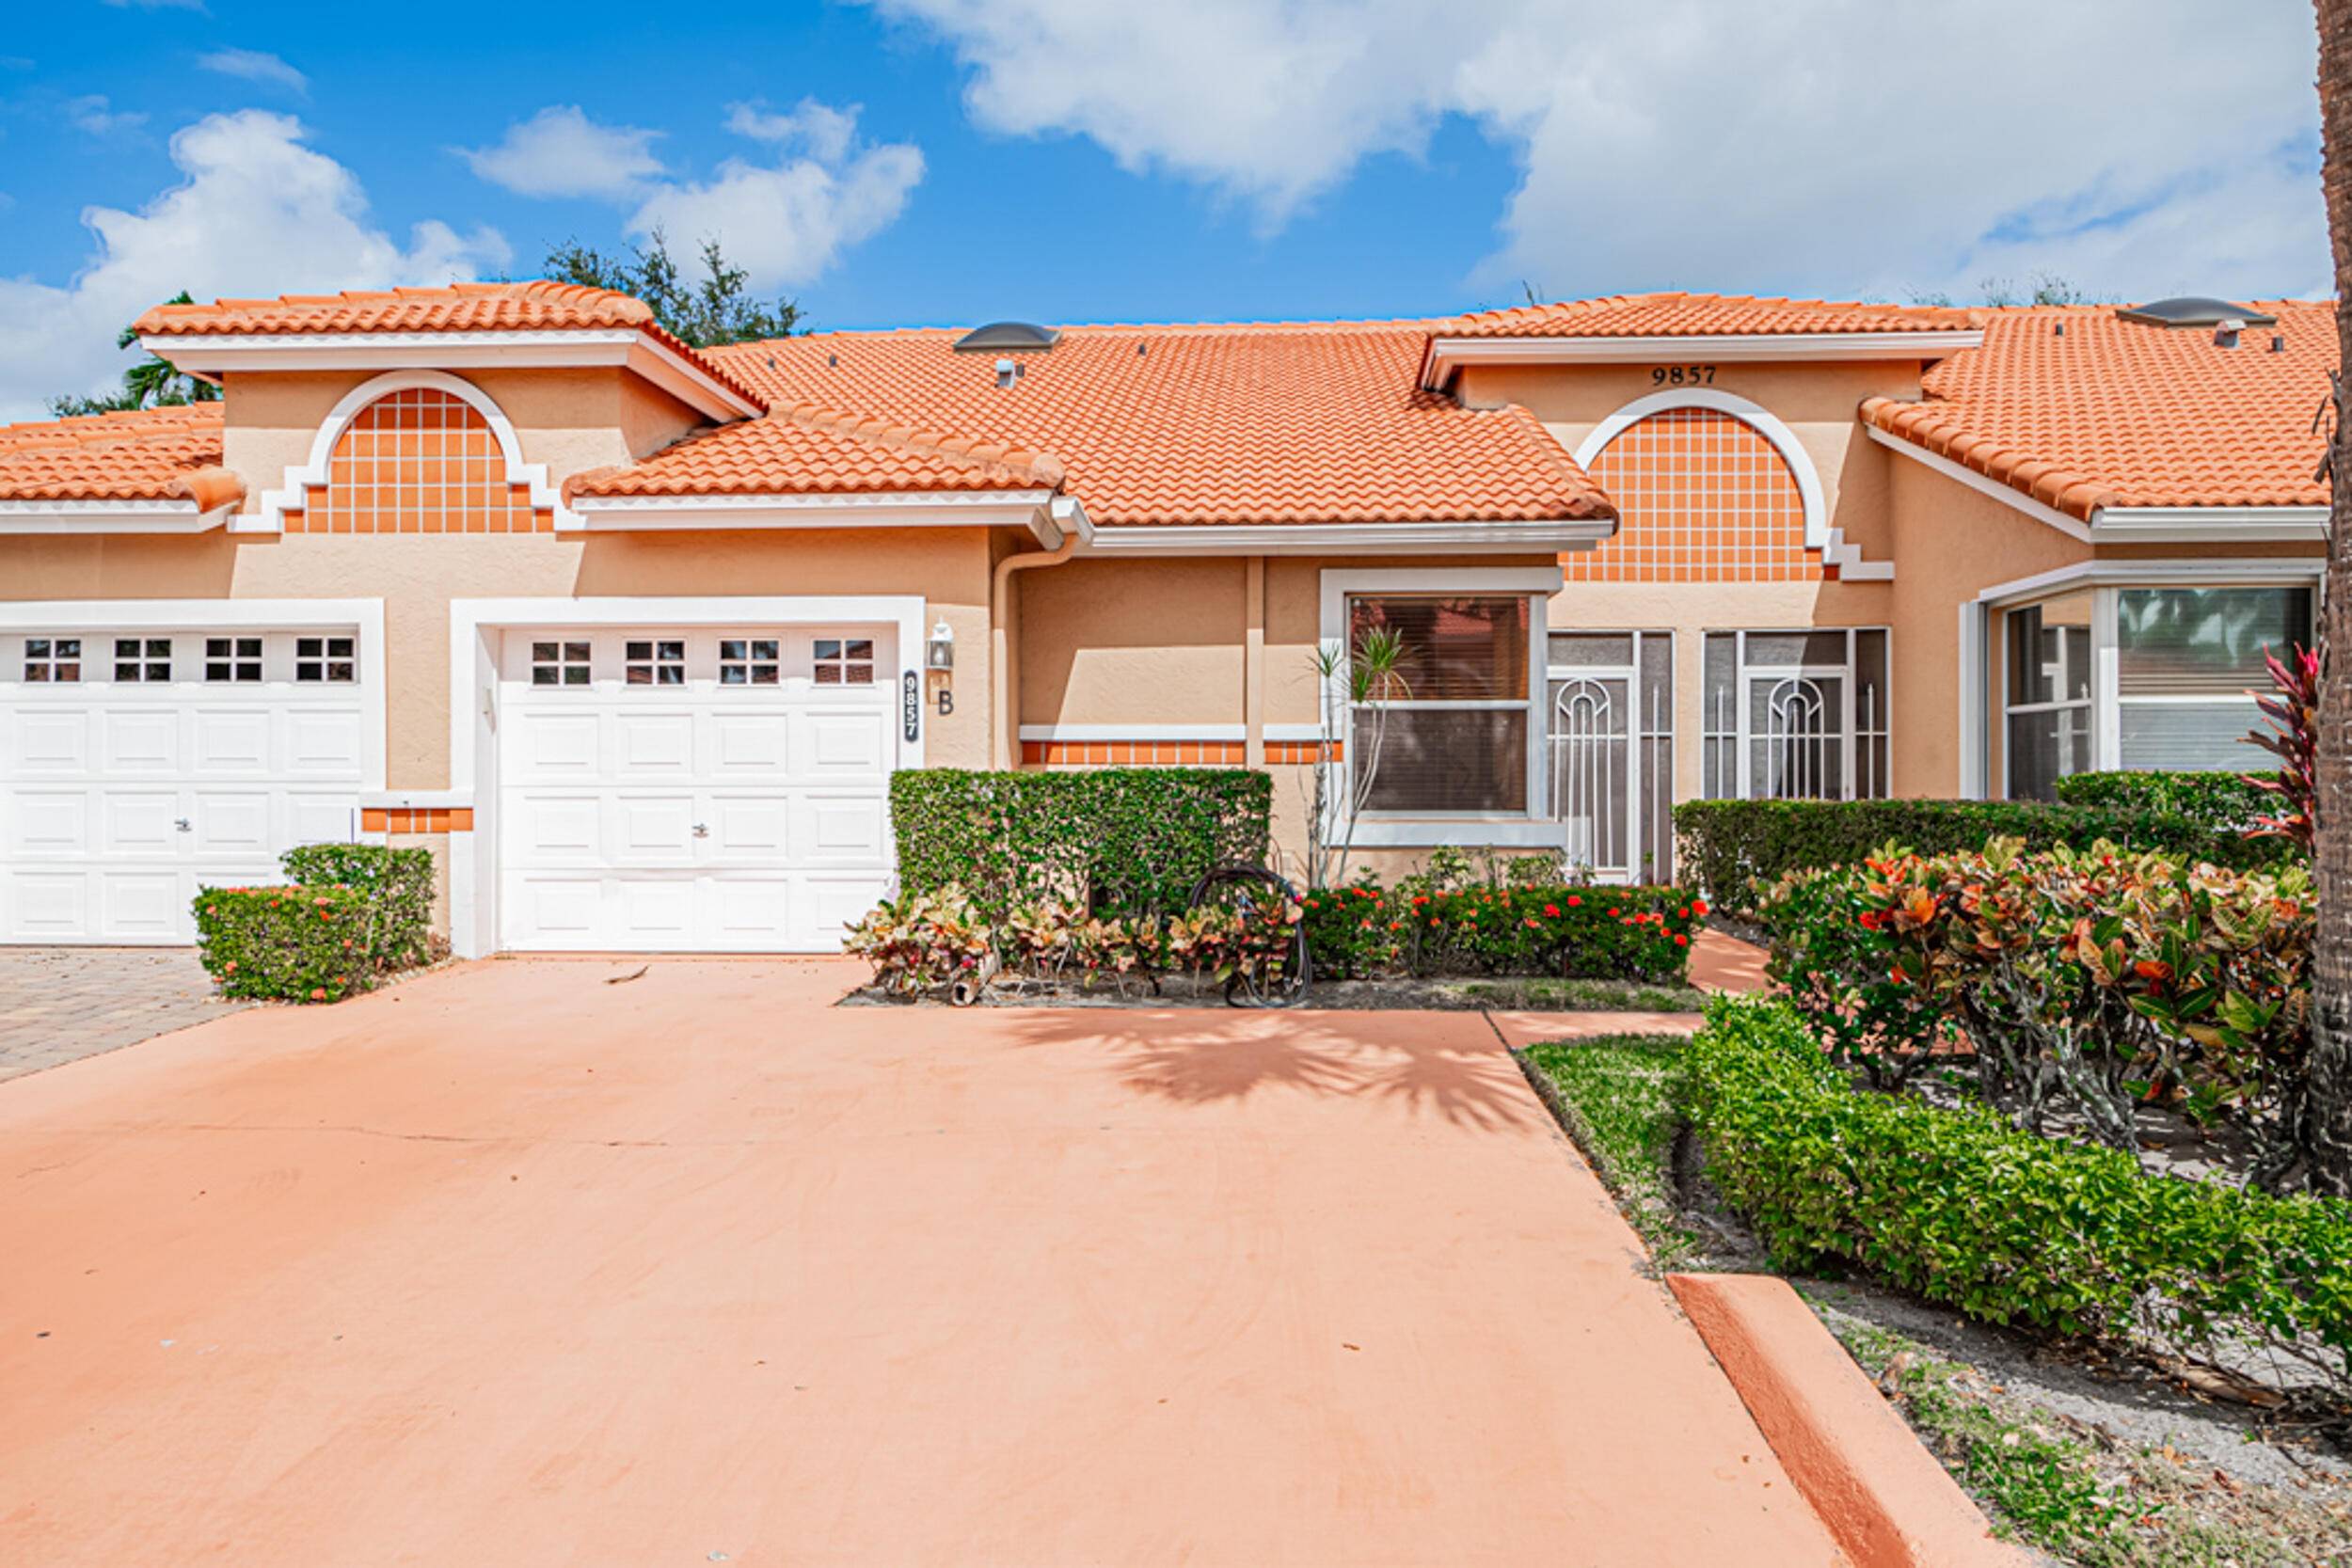 Come see this lovely 2 bedroom 2 bathroom villa located in in the vibrant 55 community of Palm Isles just a very short walk to the satellite pool !